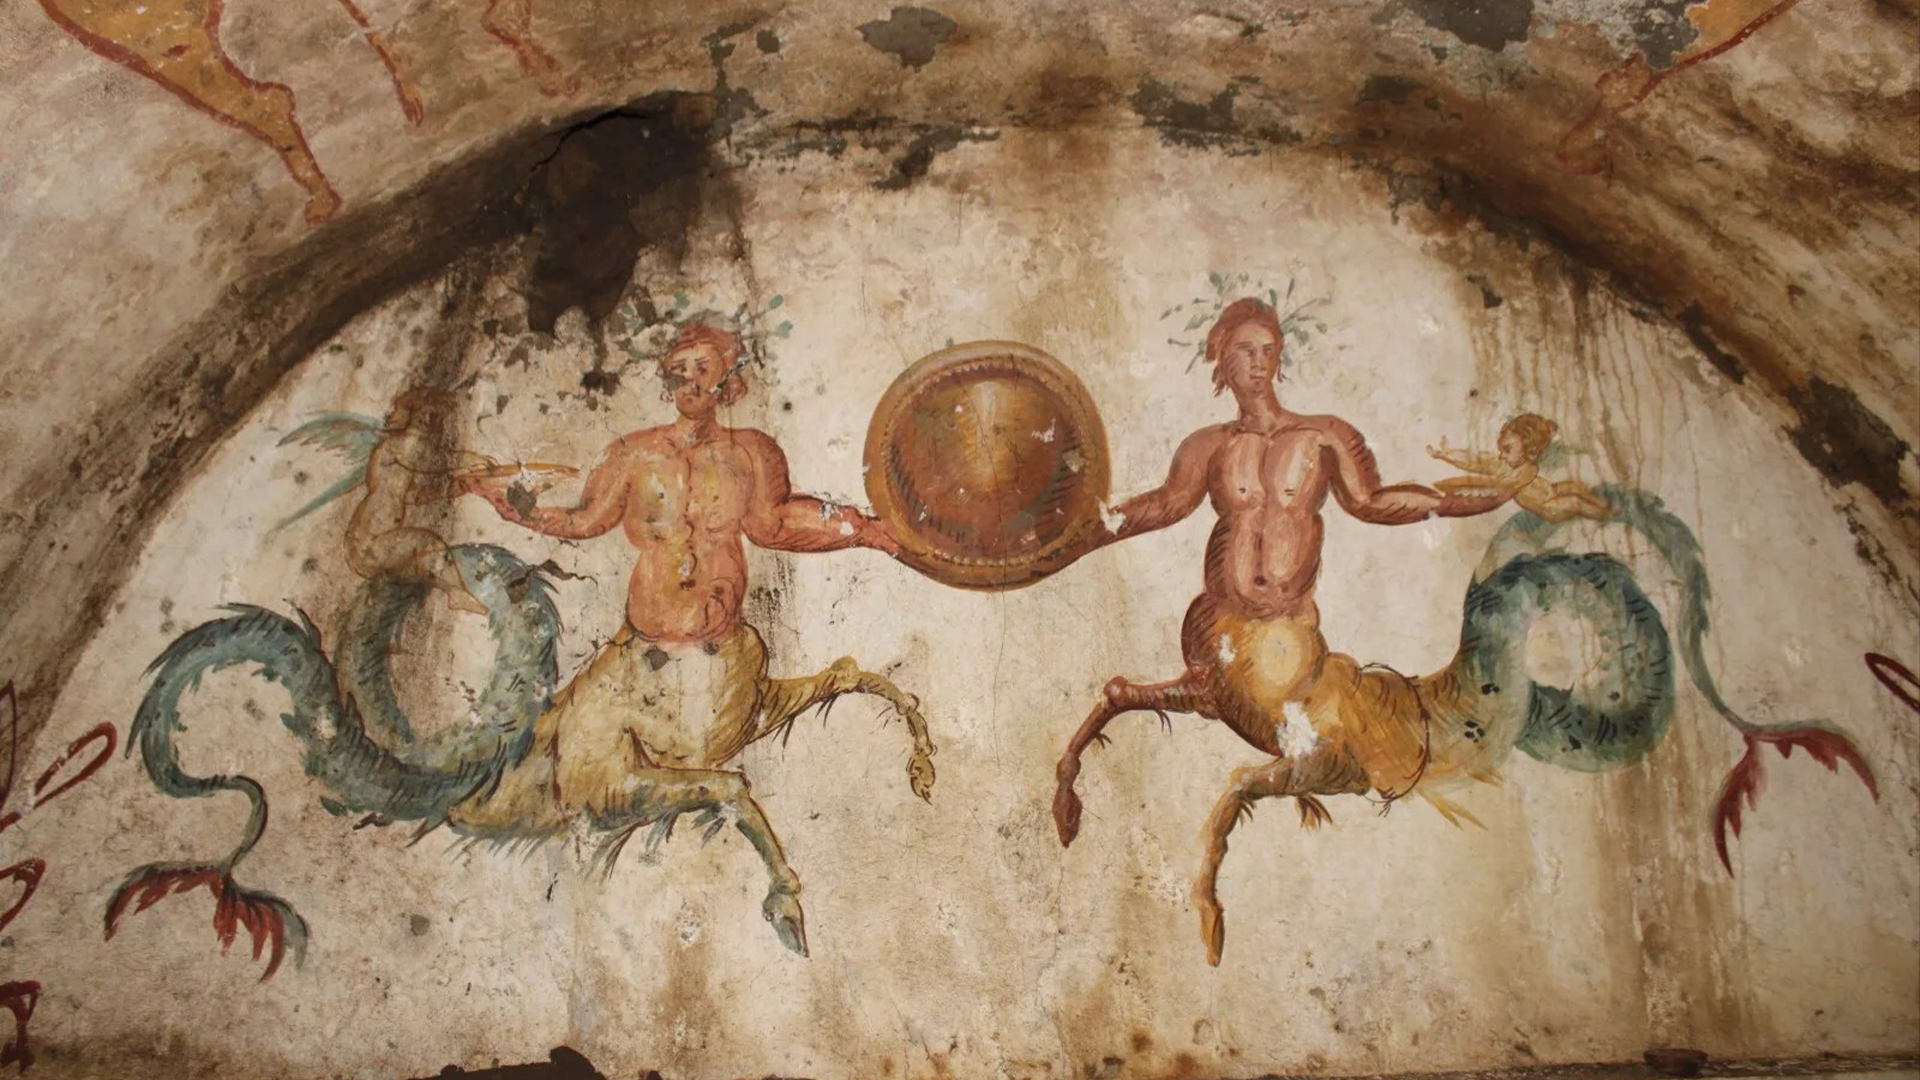  Mythical hellhound and sea-centaurs painted on 2,200-year-old tomb discovered in Italy 